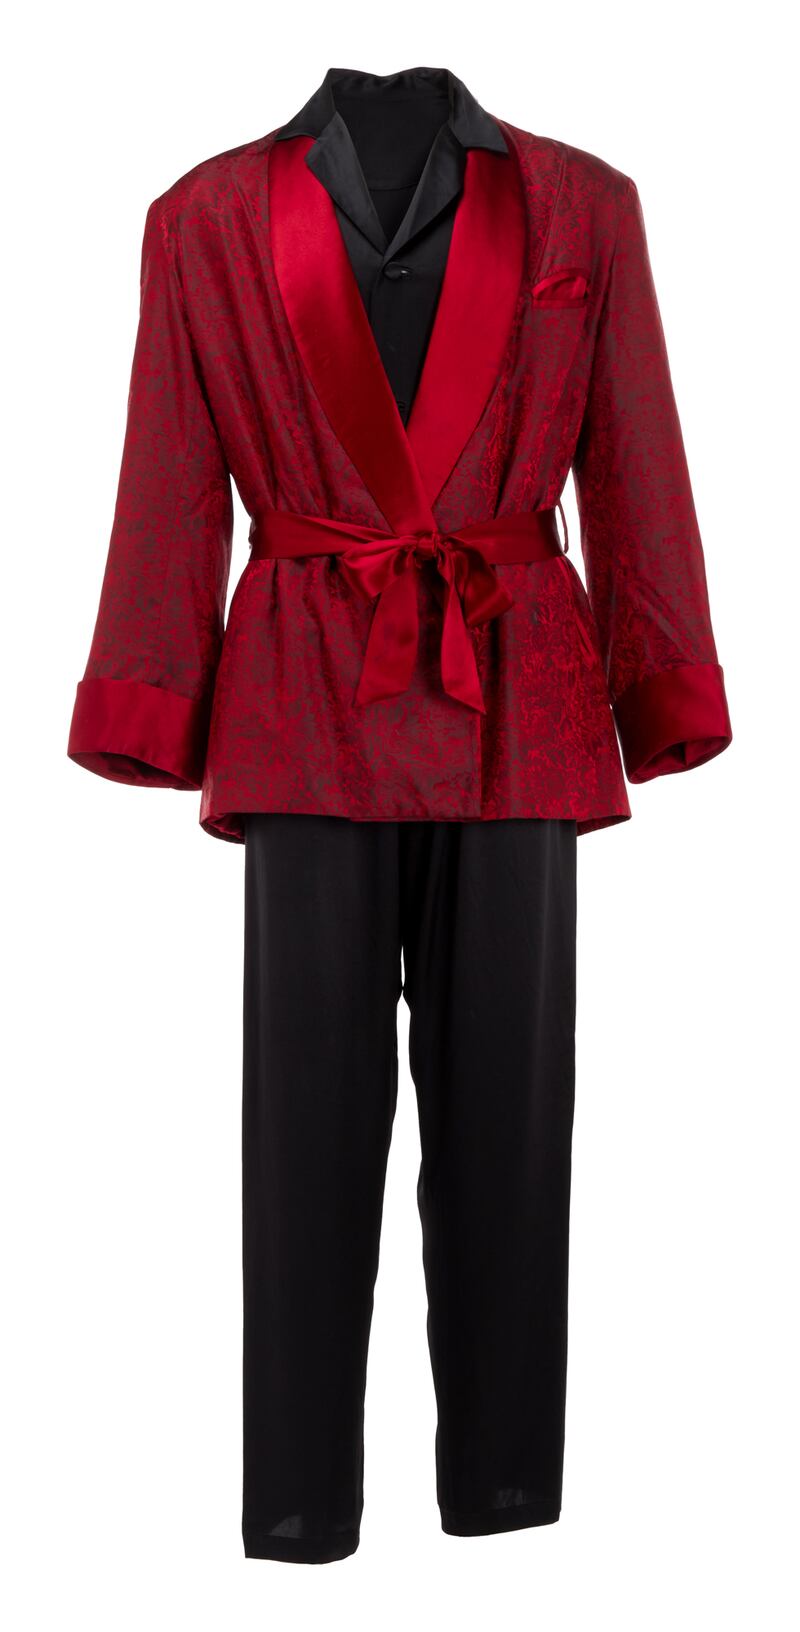 A smoking jacket owned by Hugh Hefner which was auctioned off along with the Playboy founder’s slippers, pyjamas and tobacco pipe